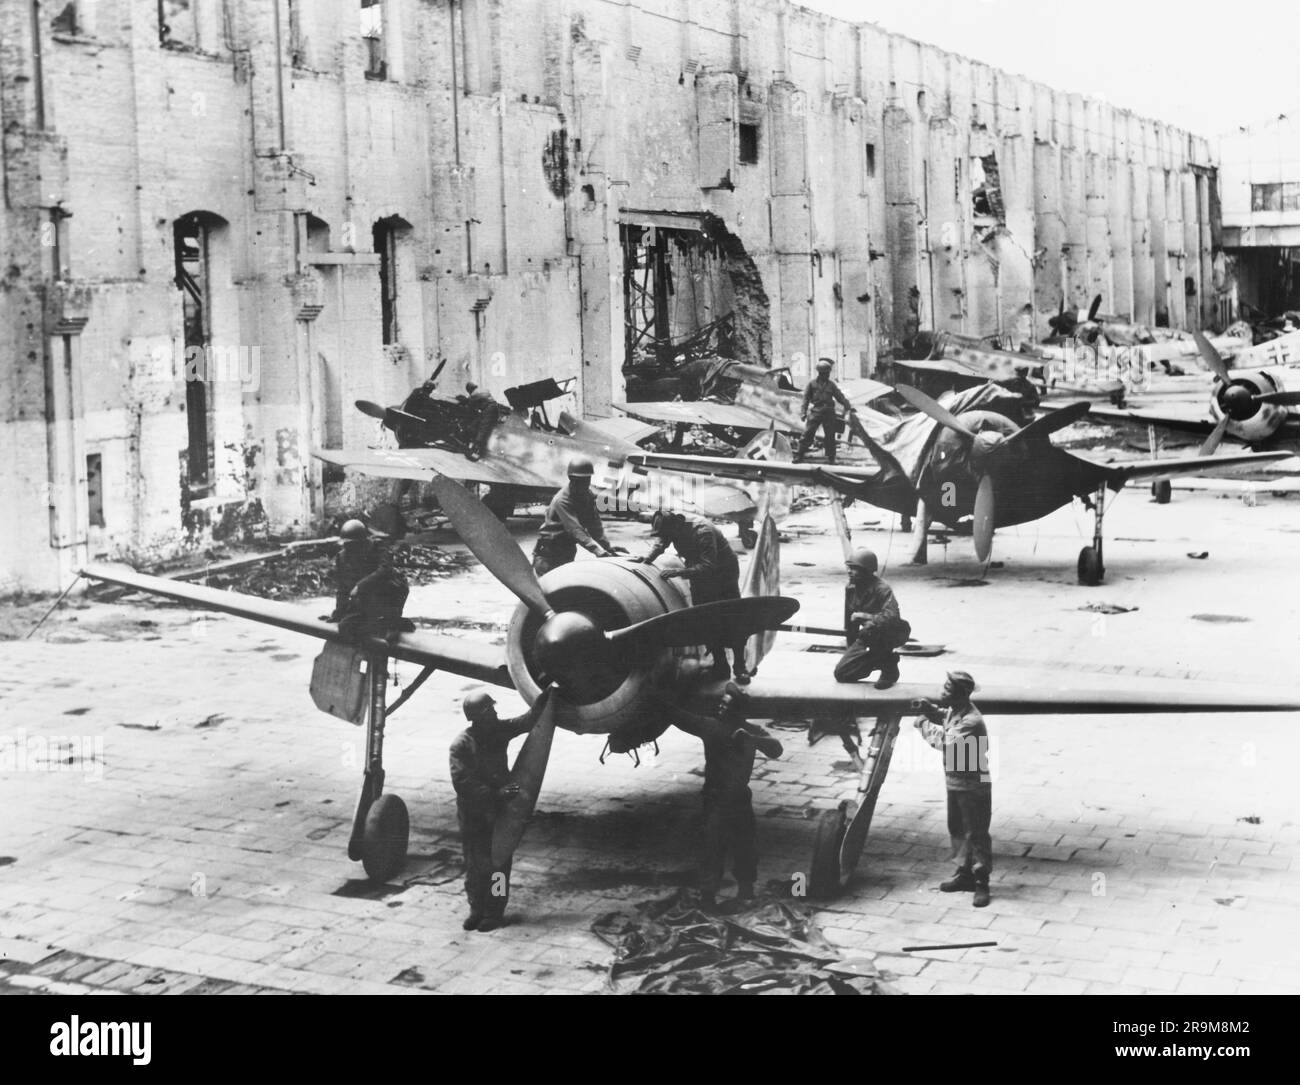 U.S. Army Quartermaster troops inspecting found Focke-Wulf fighter planes grounded either by rubble or lack of gasoline, Oschersleben, Germany, Sgt. J. Pazen, Carl Spaatz Collection, April 1945 Stock Photo